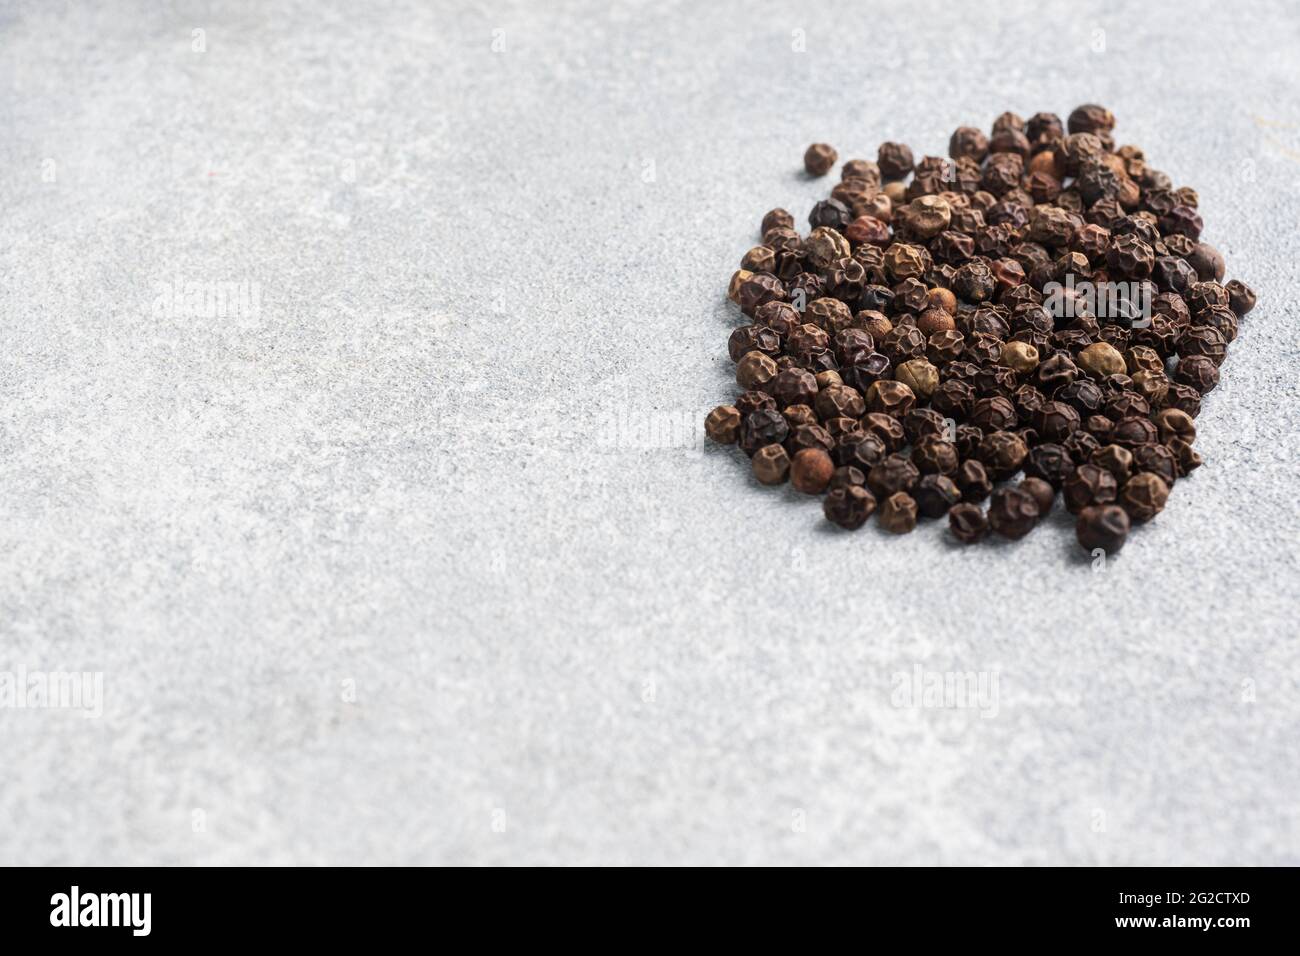 Black pepper peas on a gray concrete background, copy space Stock Photo